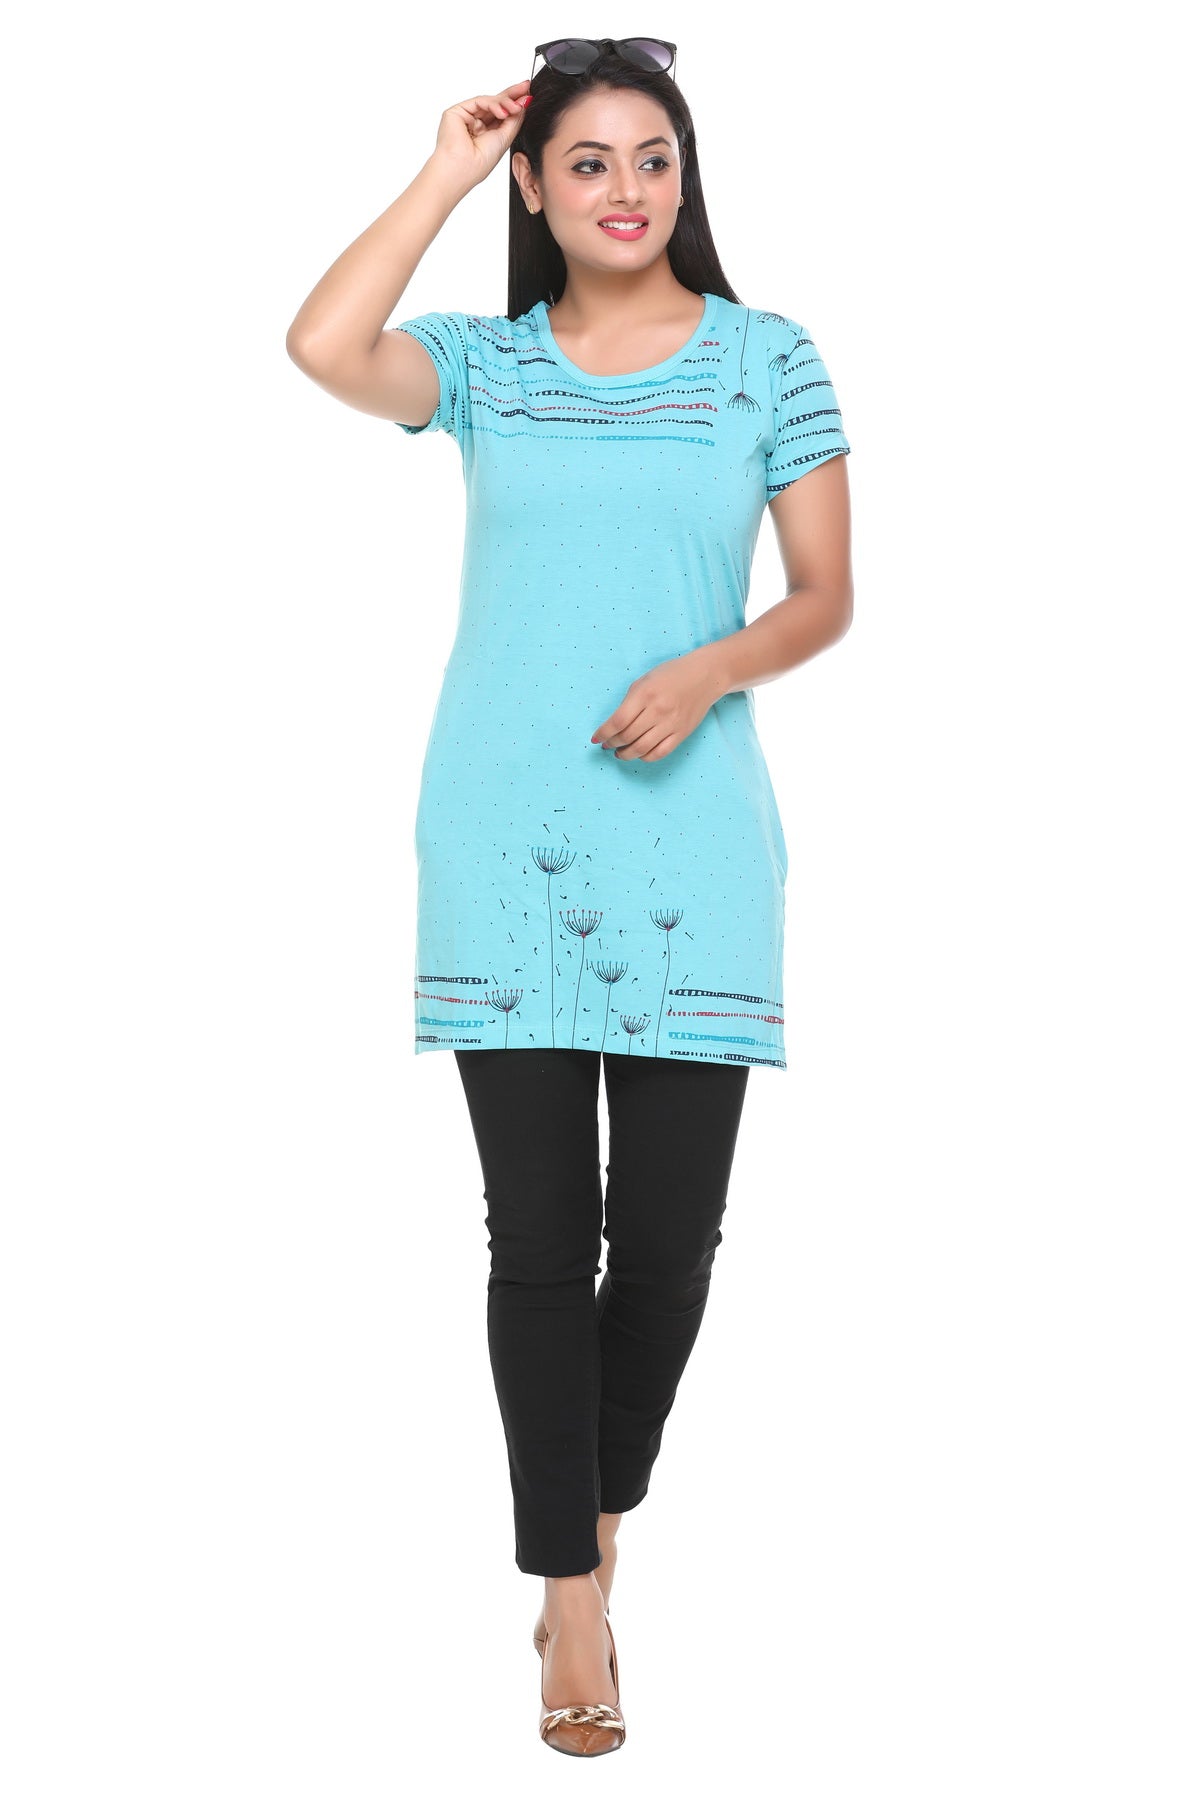 Comfortable Aqua Cotton Printed Half Sleeve Long T-shirts For Women At Best Price